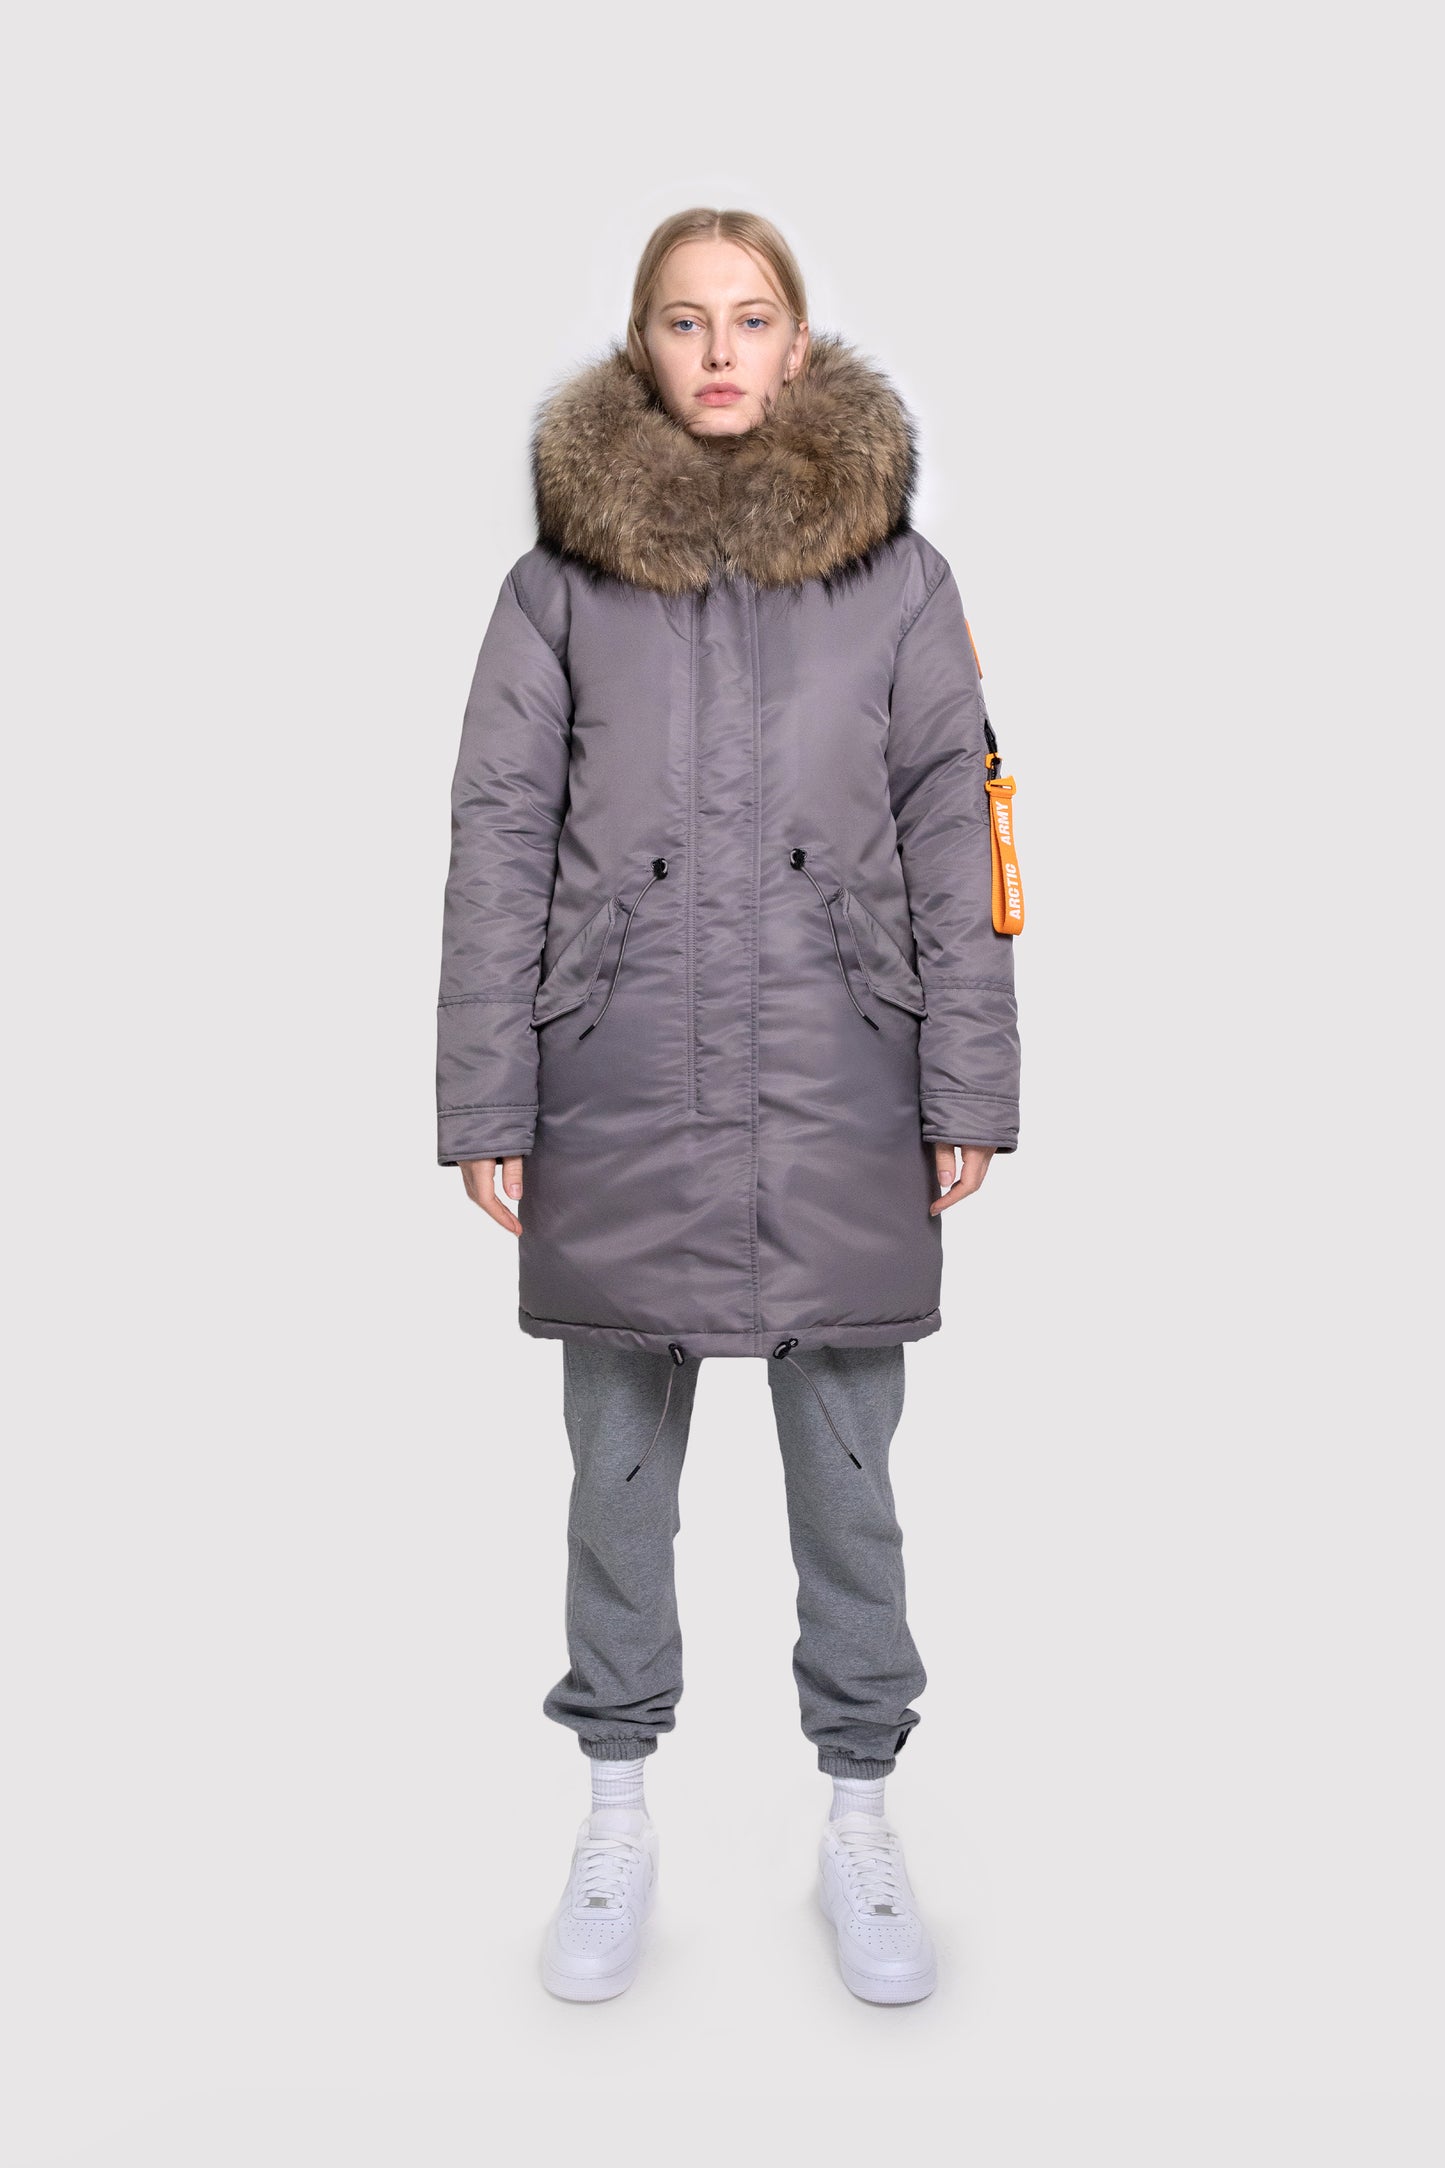 Women's Parka with Fur in Grey